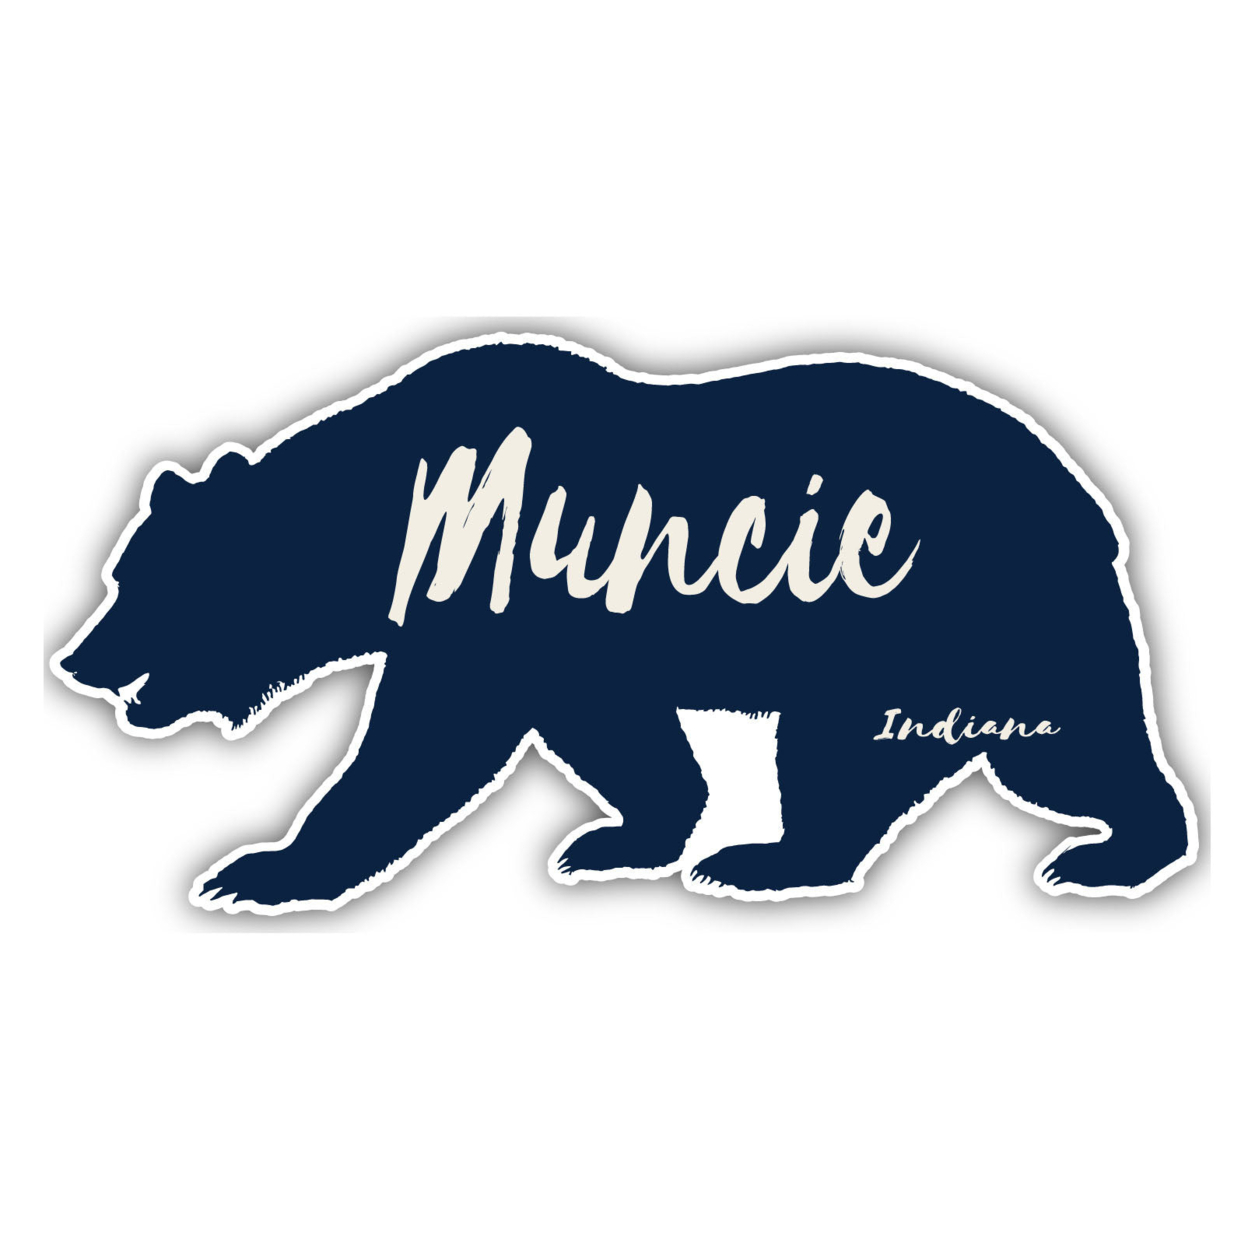 Muncie Indiana Souvenir Decorative Stickers (Choose Theme And Size) - Single Unit, 4-Inch, Great Outdoors